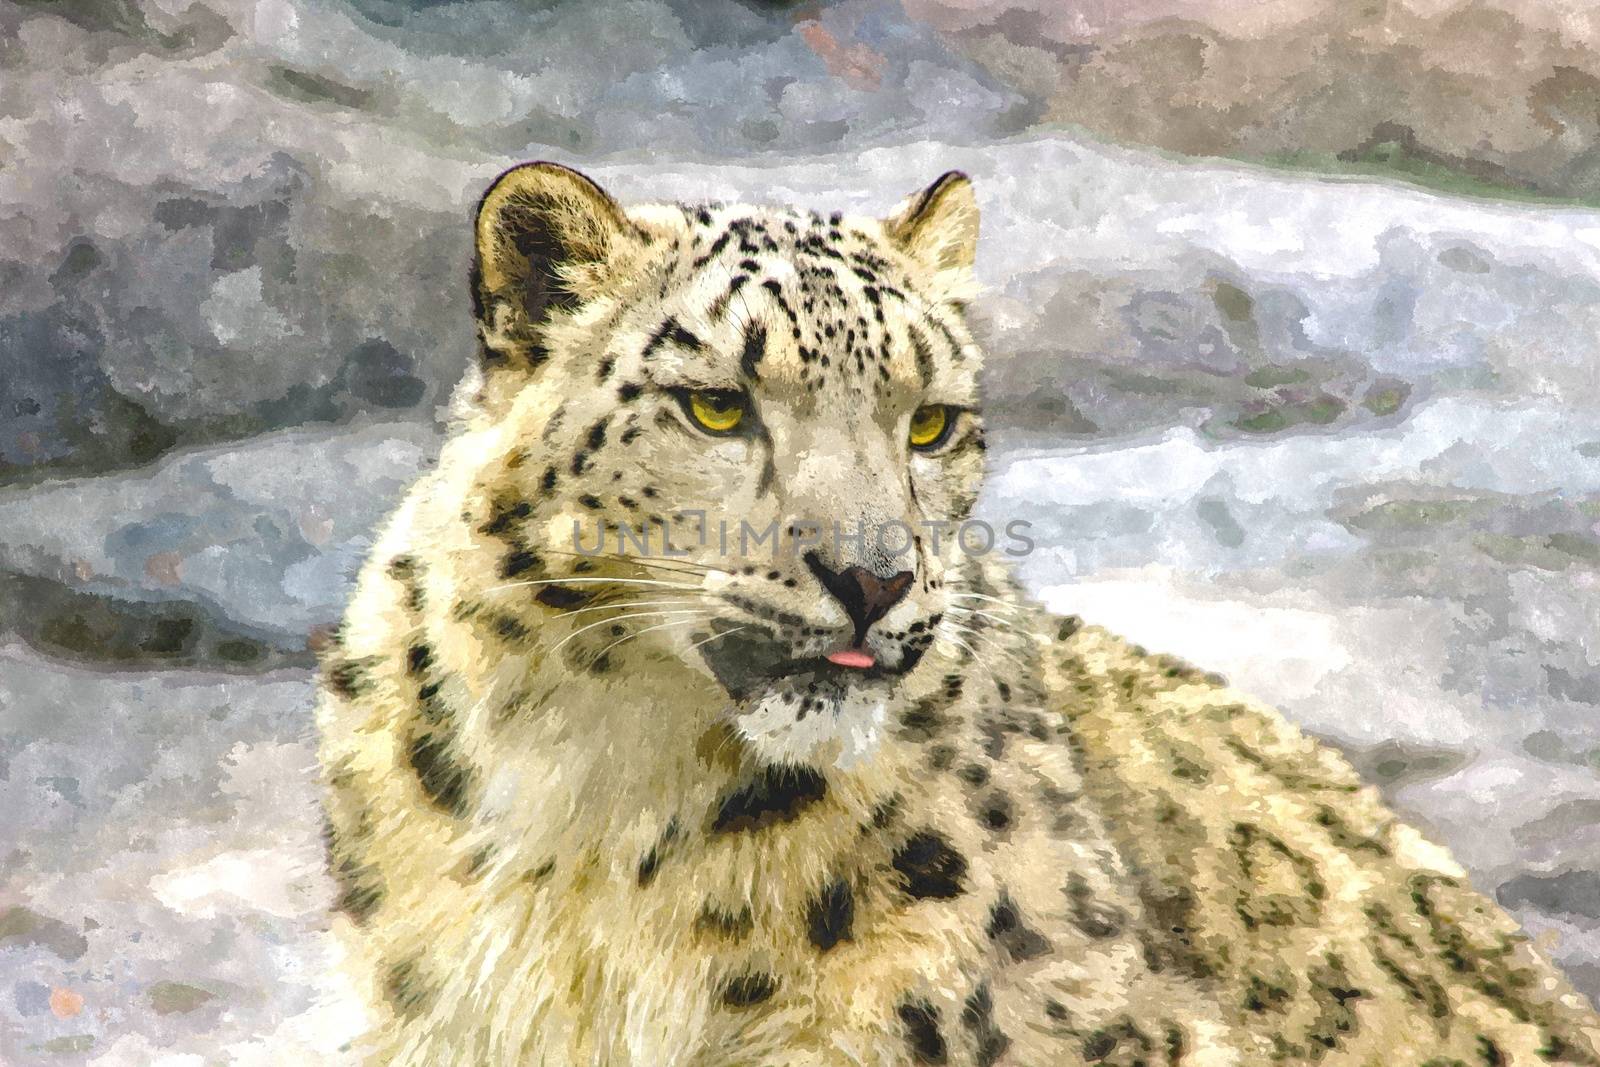 digital artwork: water color painting of a snow leopard by mynewturtle1